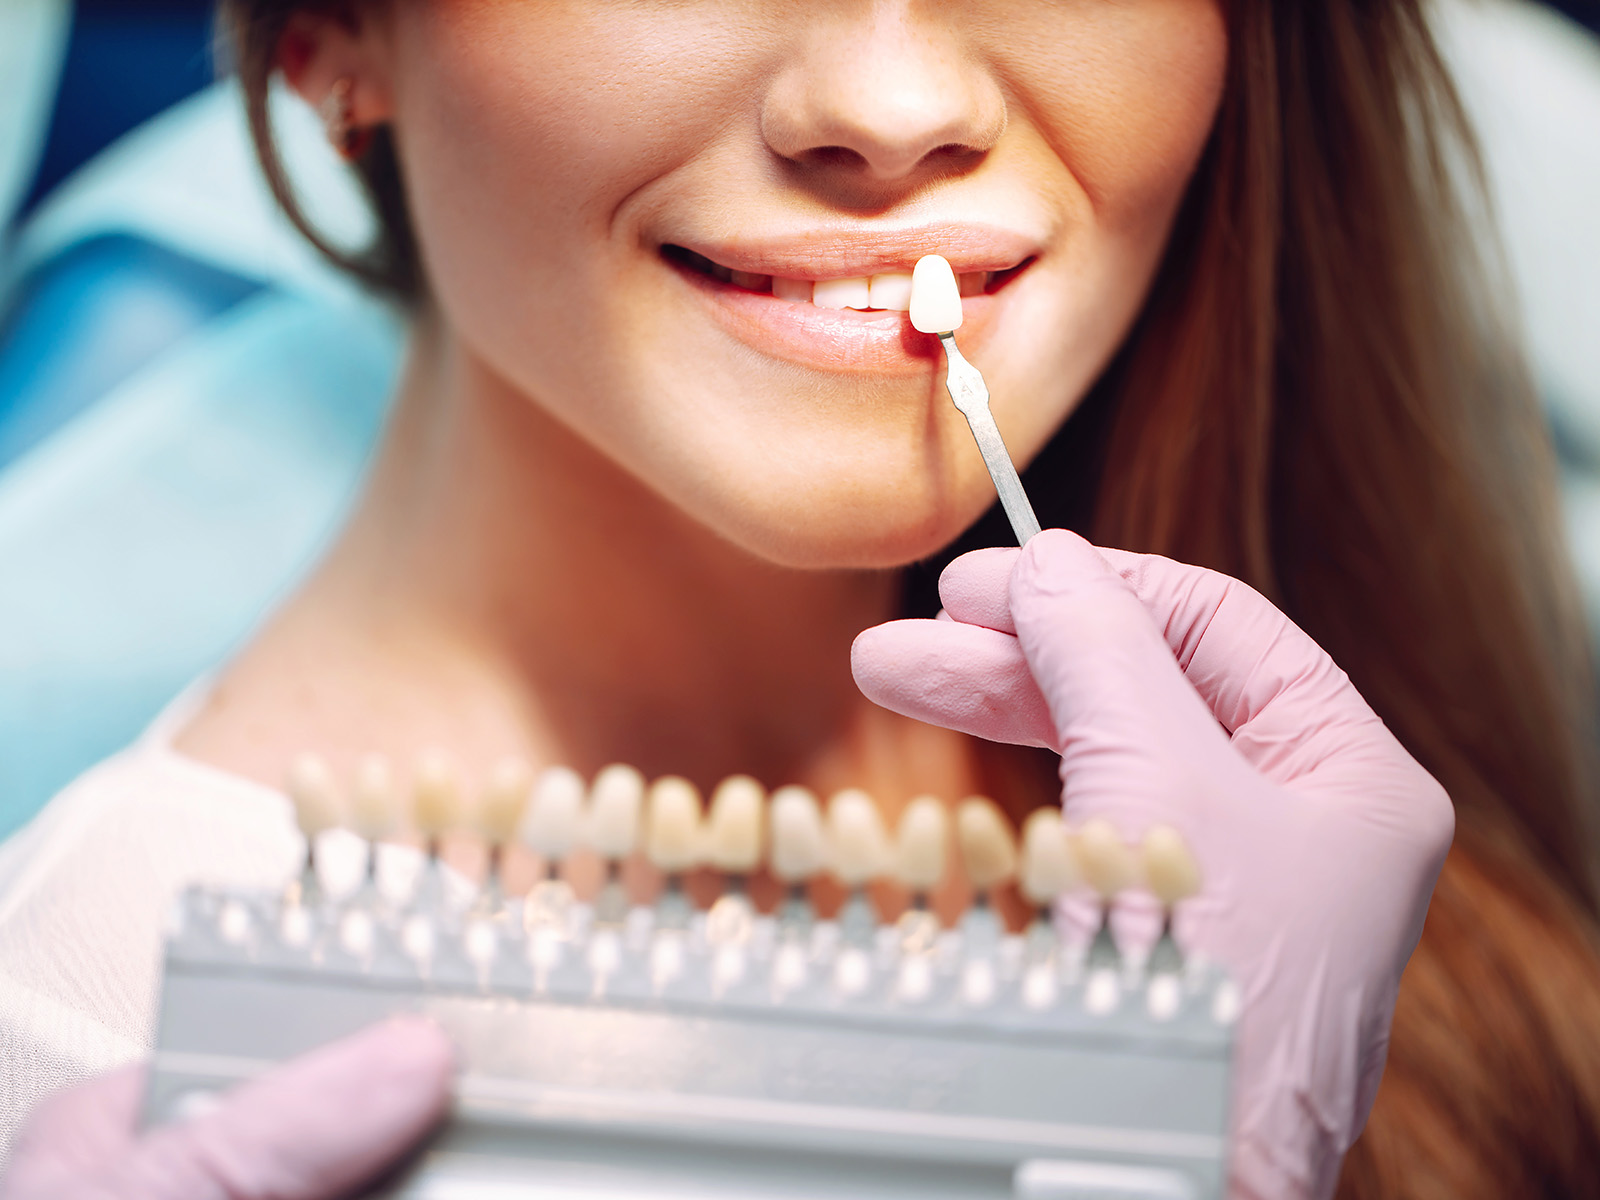 Common Dental Issues Veneers Can Fix